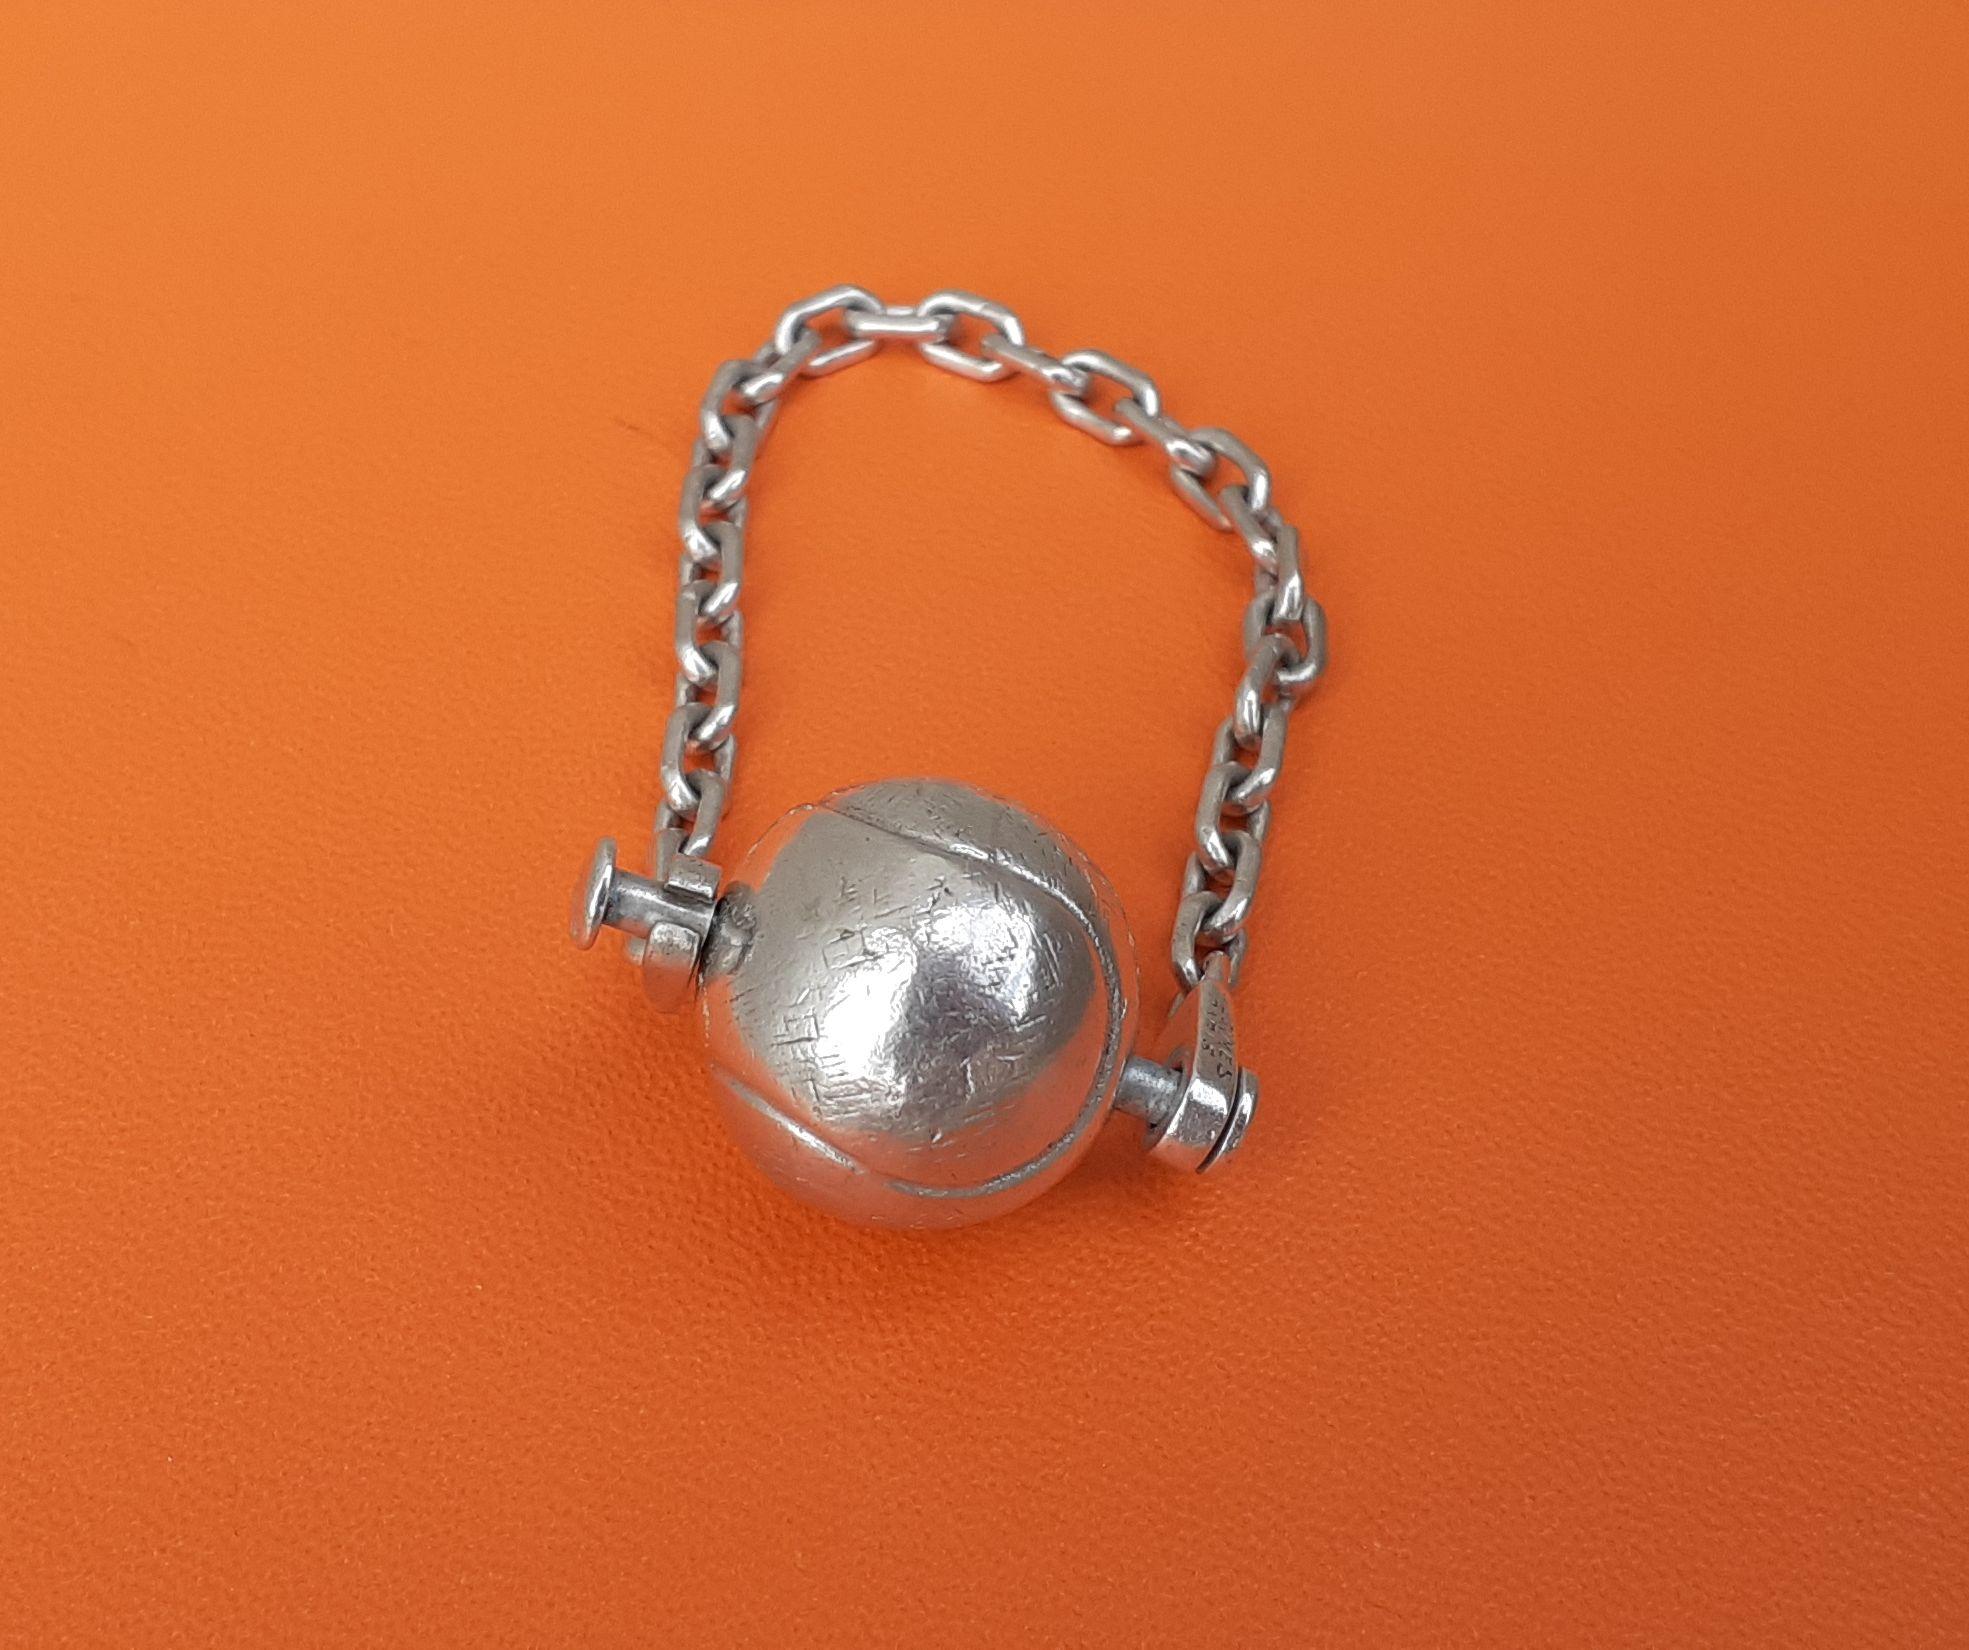 Rare Authentic Hermès Key Ring

In shape of a Tennis Ball

Vintage item

Made of silver

Colorways: silver

